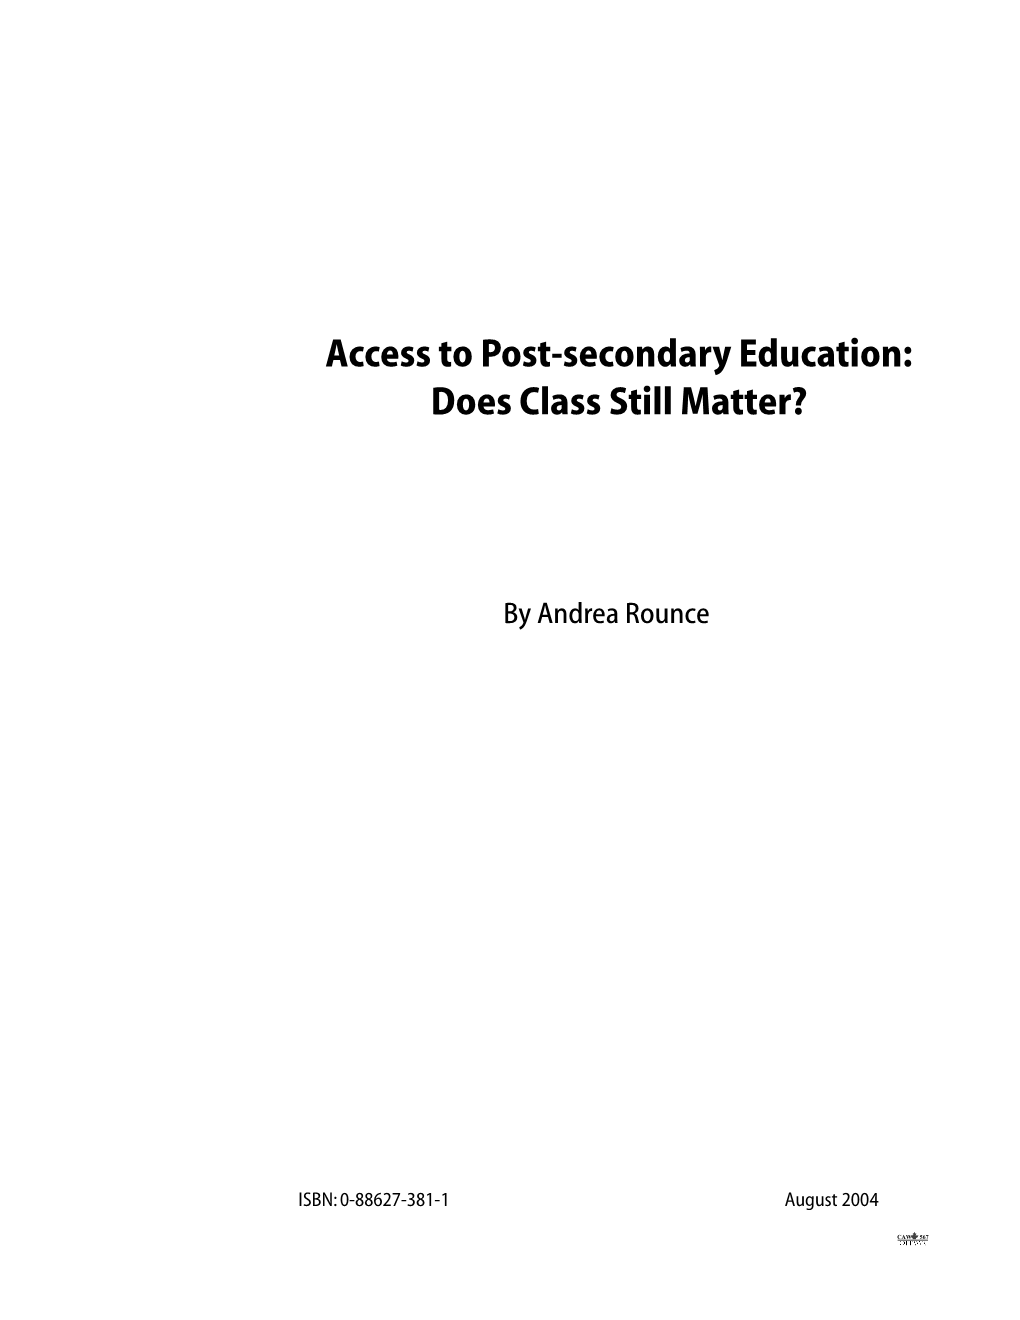 Access to Post-Secondary Education: Does Class Still Matter?